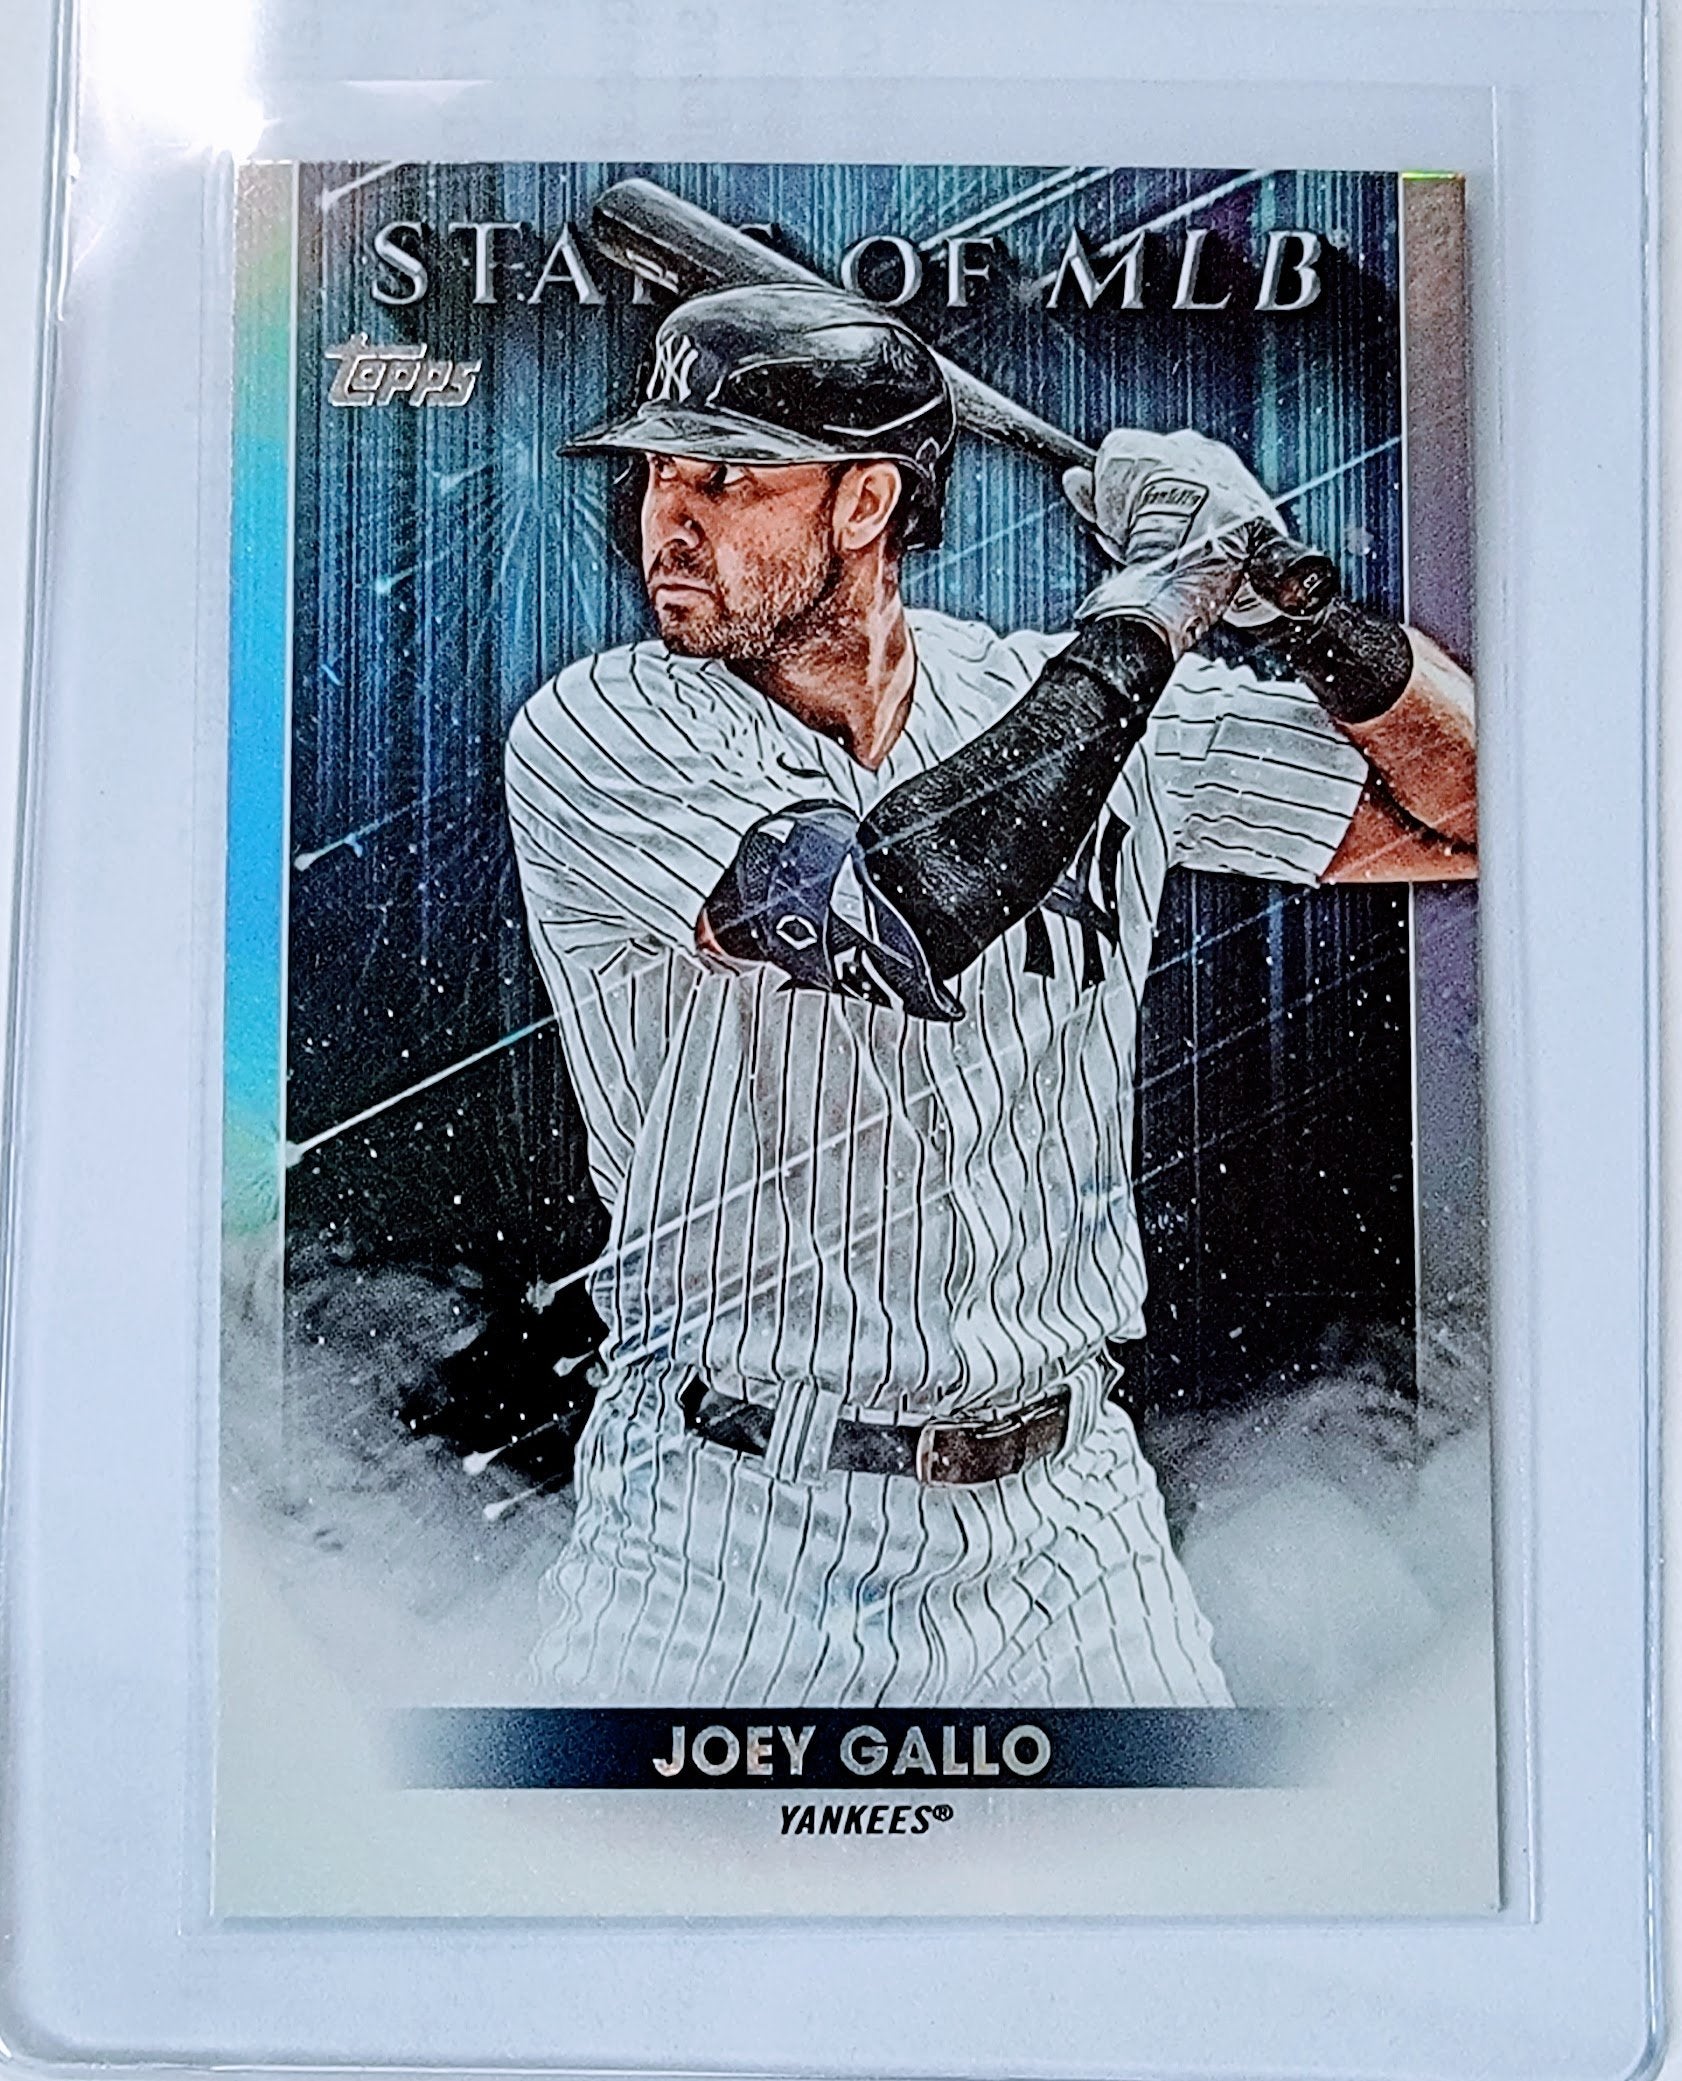 2022 Topps Joey Gallo Stars of the MLB Baseball Trading Card GRB1 simple Xclusive Collectibles   